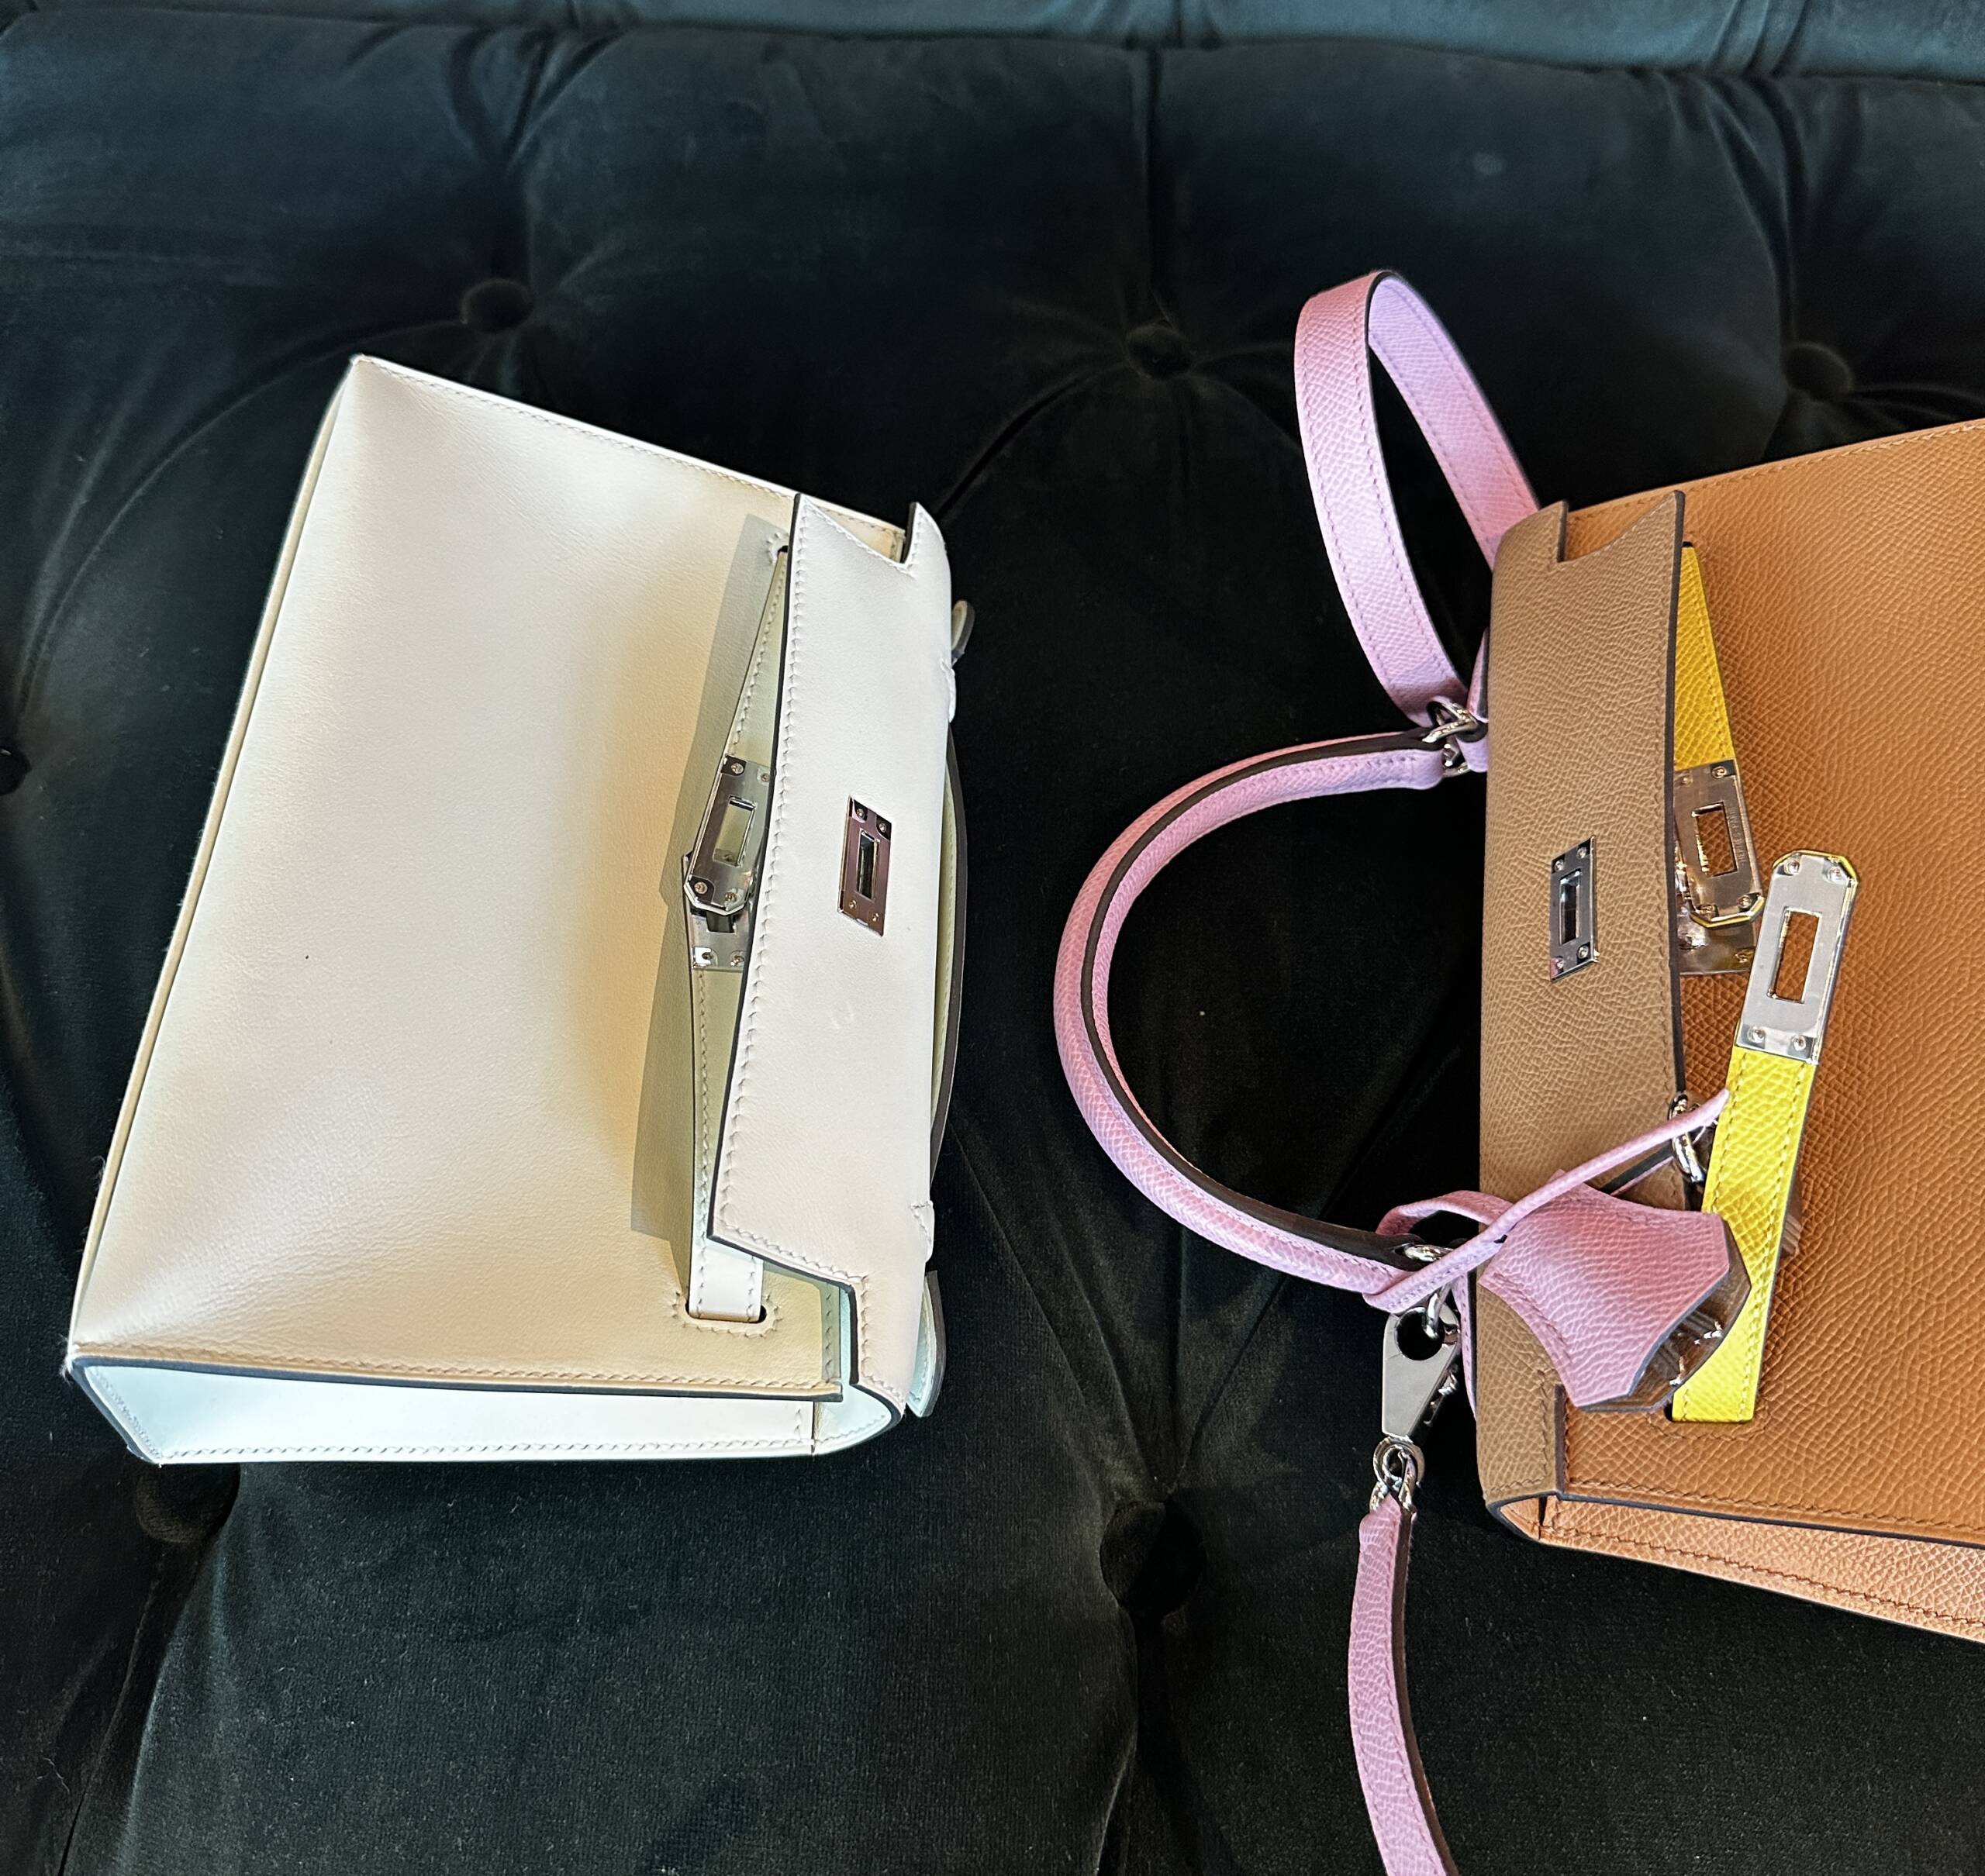 Reply to @vergetisalexis hermes kelly pochette review 💚 #hermeskelly